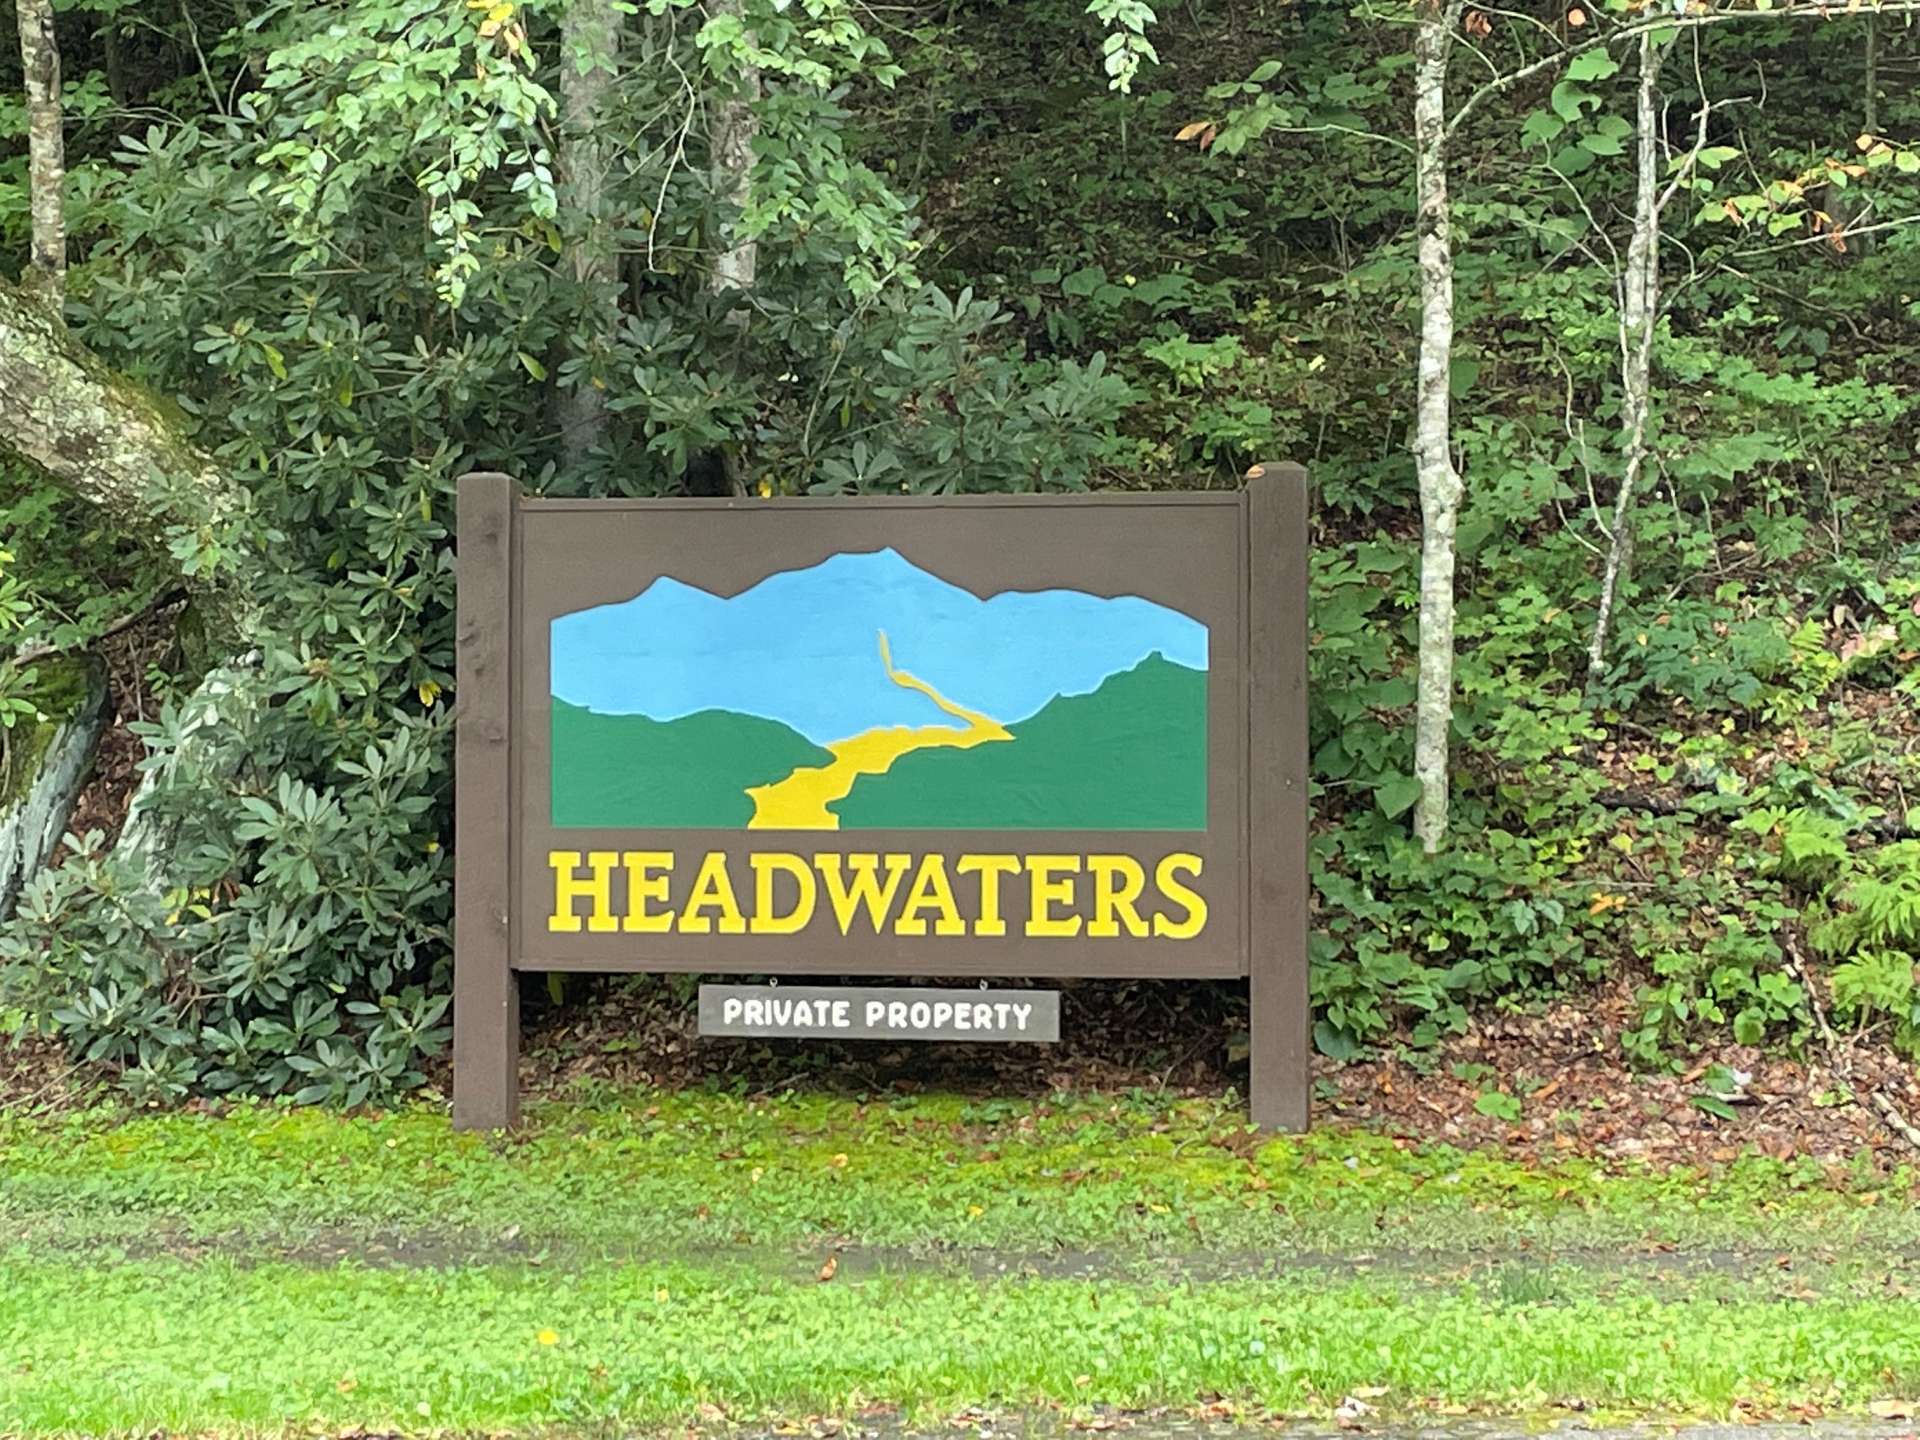 The Headwaters is a private gated mountain community in the Todd area of Southern Ashe county.